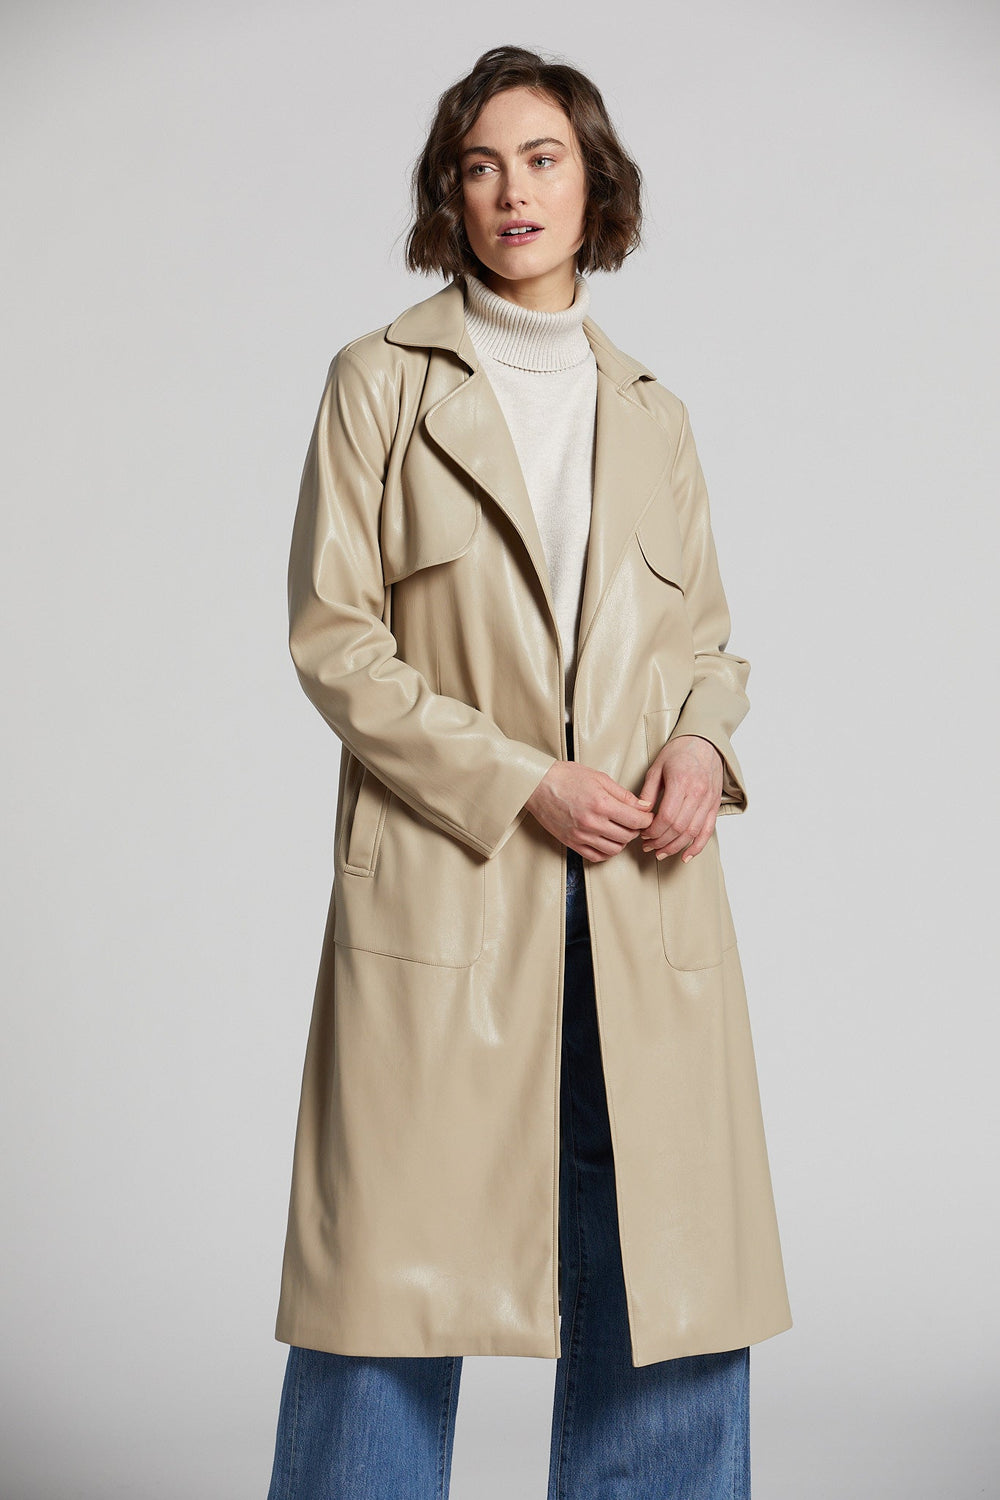 Adroit Atelier Nina Faux Leather Trench Coat in Beige